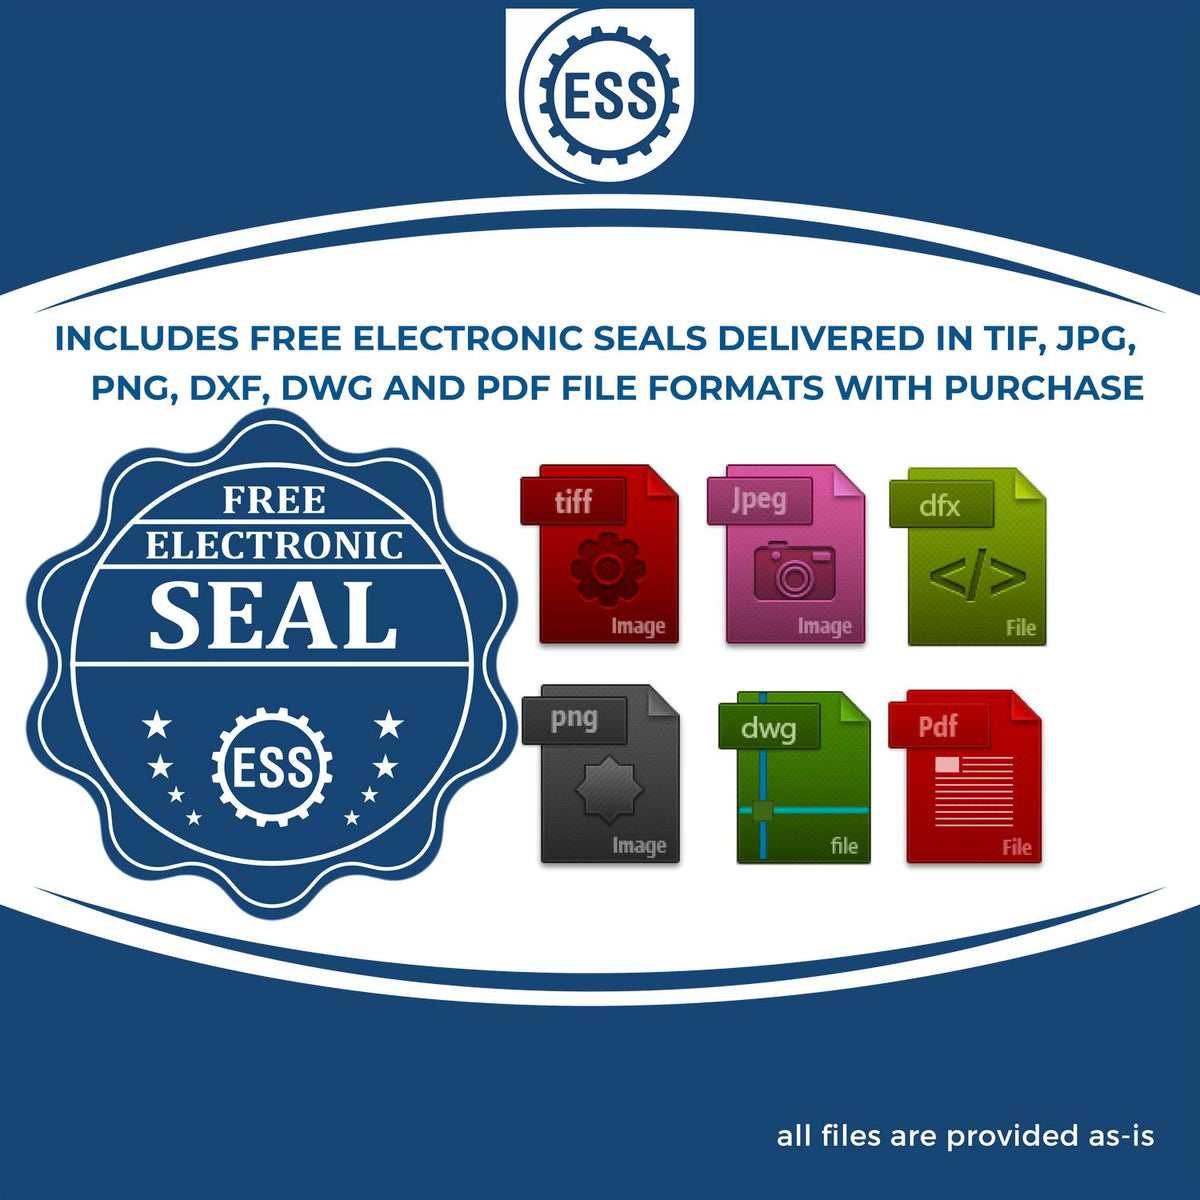 An infographic for the free electronic seal for the Long Reach Maryland PE Seal illustrating the different file type icons such as DXF, DWG, TIF, JPG and PNG.